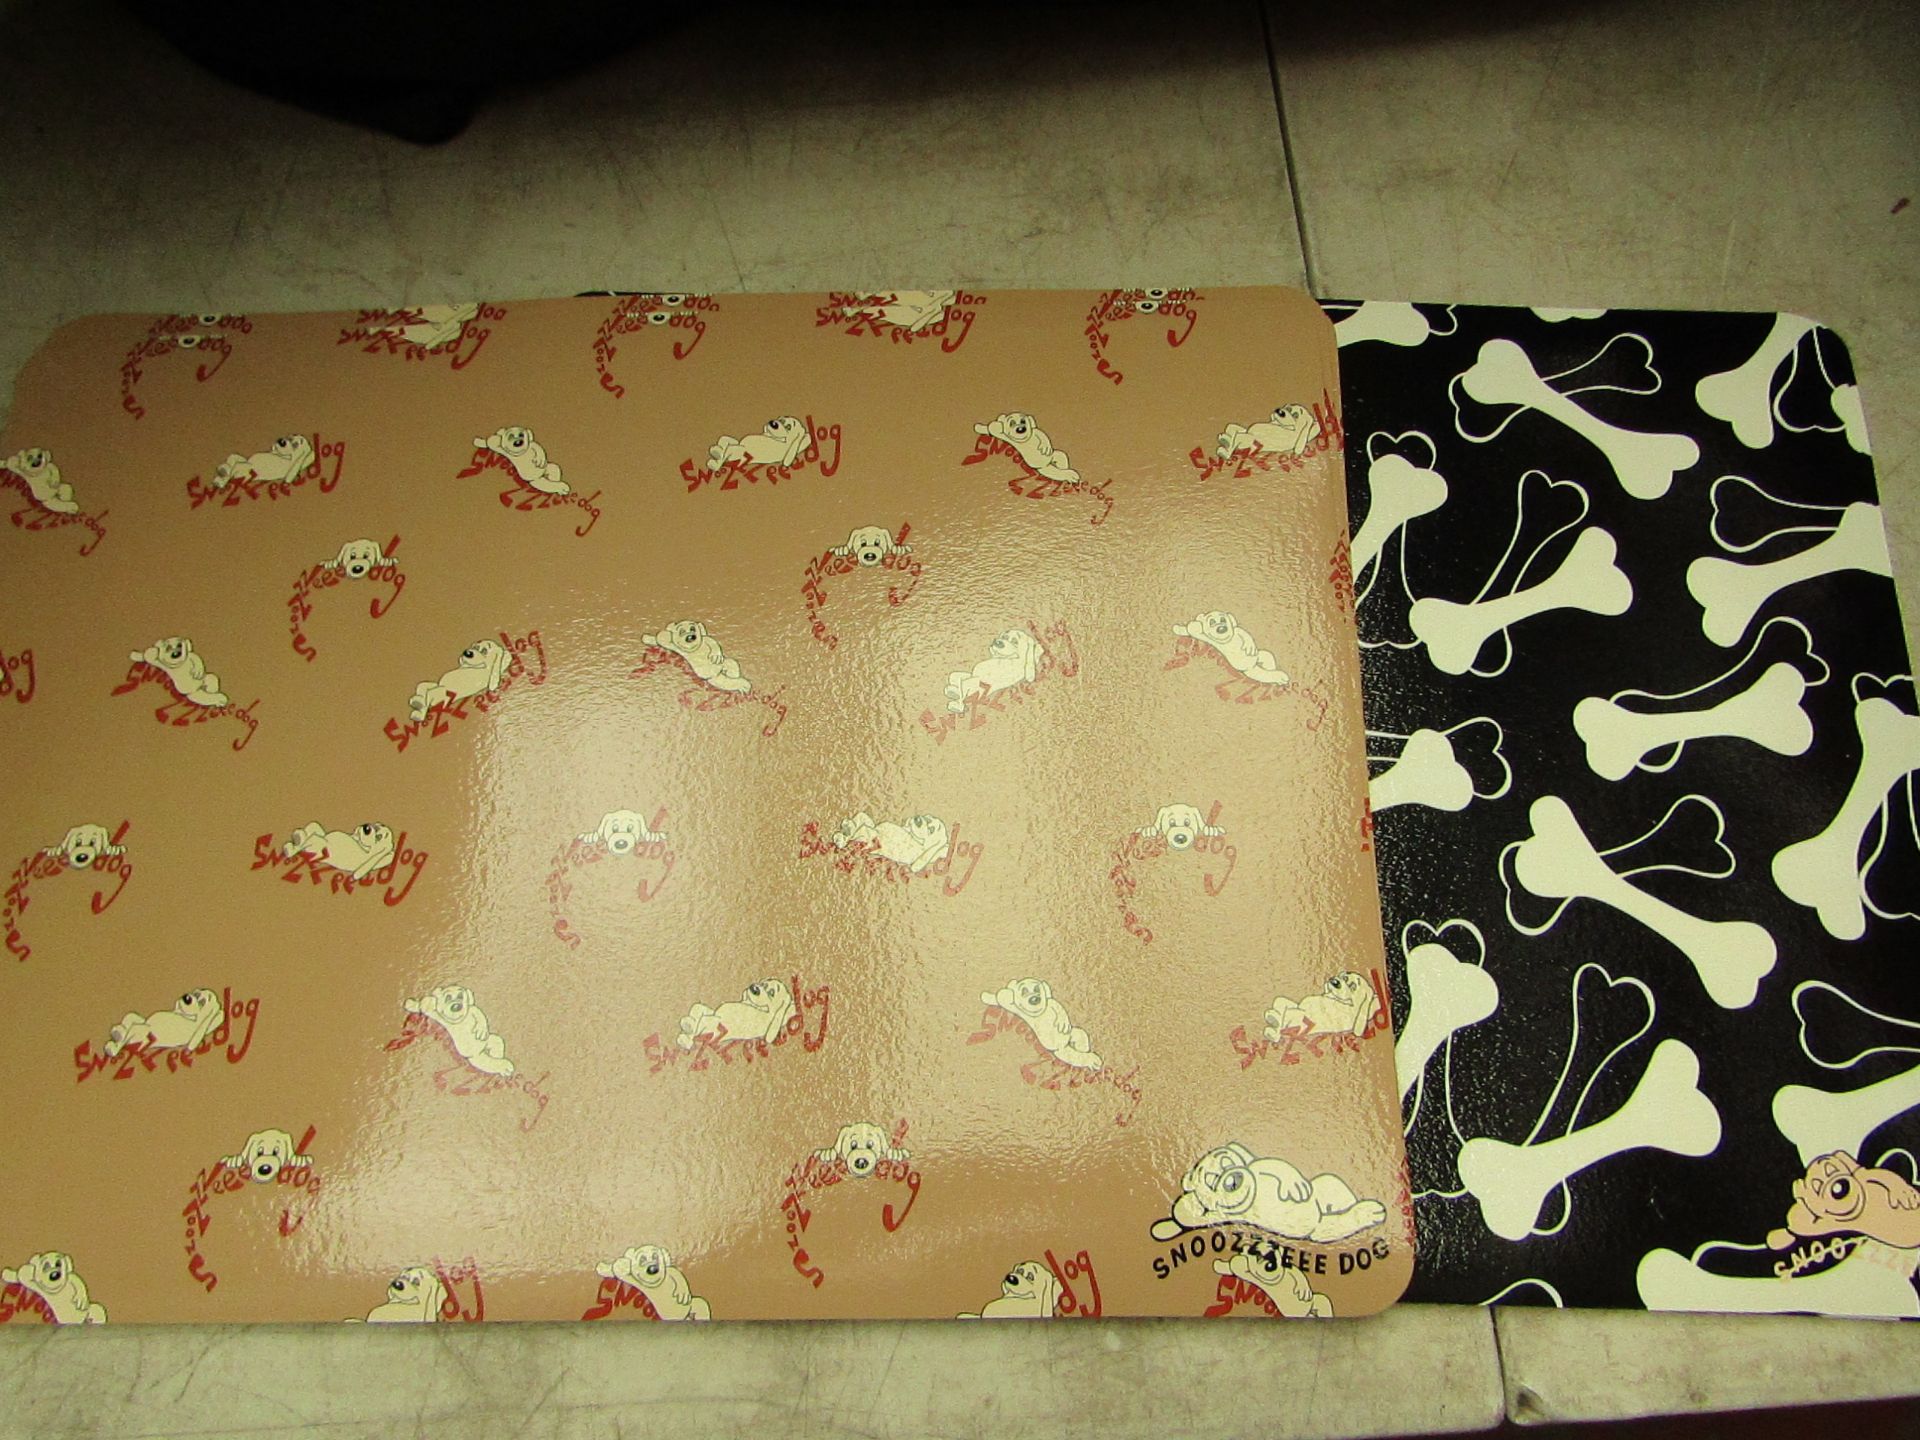 5 Packs of 6 Snoozzzeee Dog Food Mats. 42cm x 30cm Each. New & Packaged